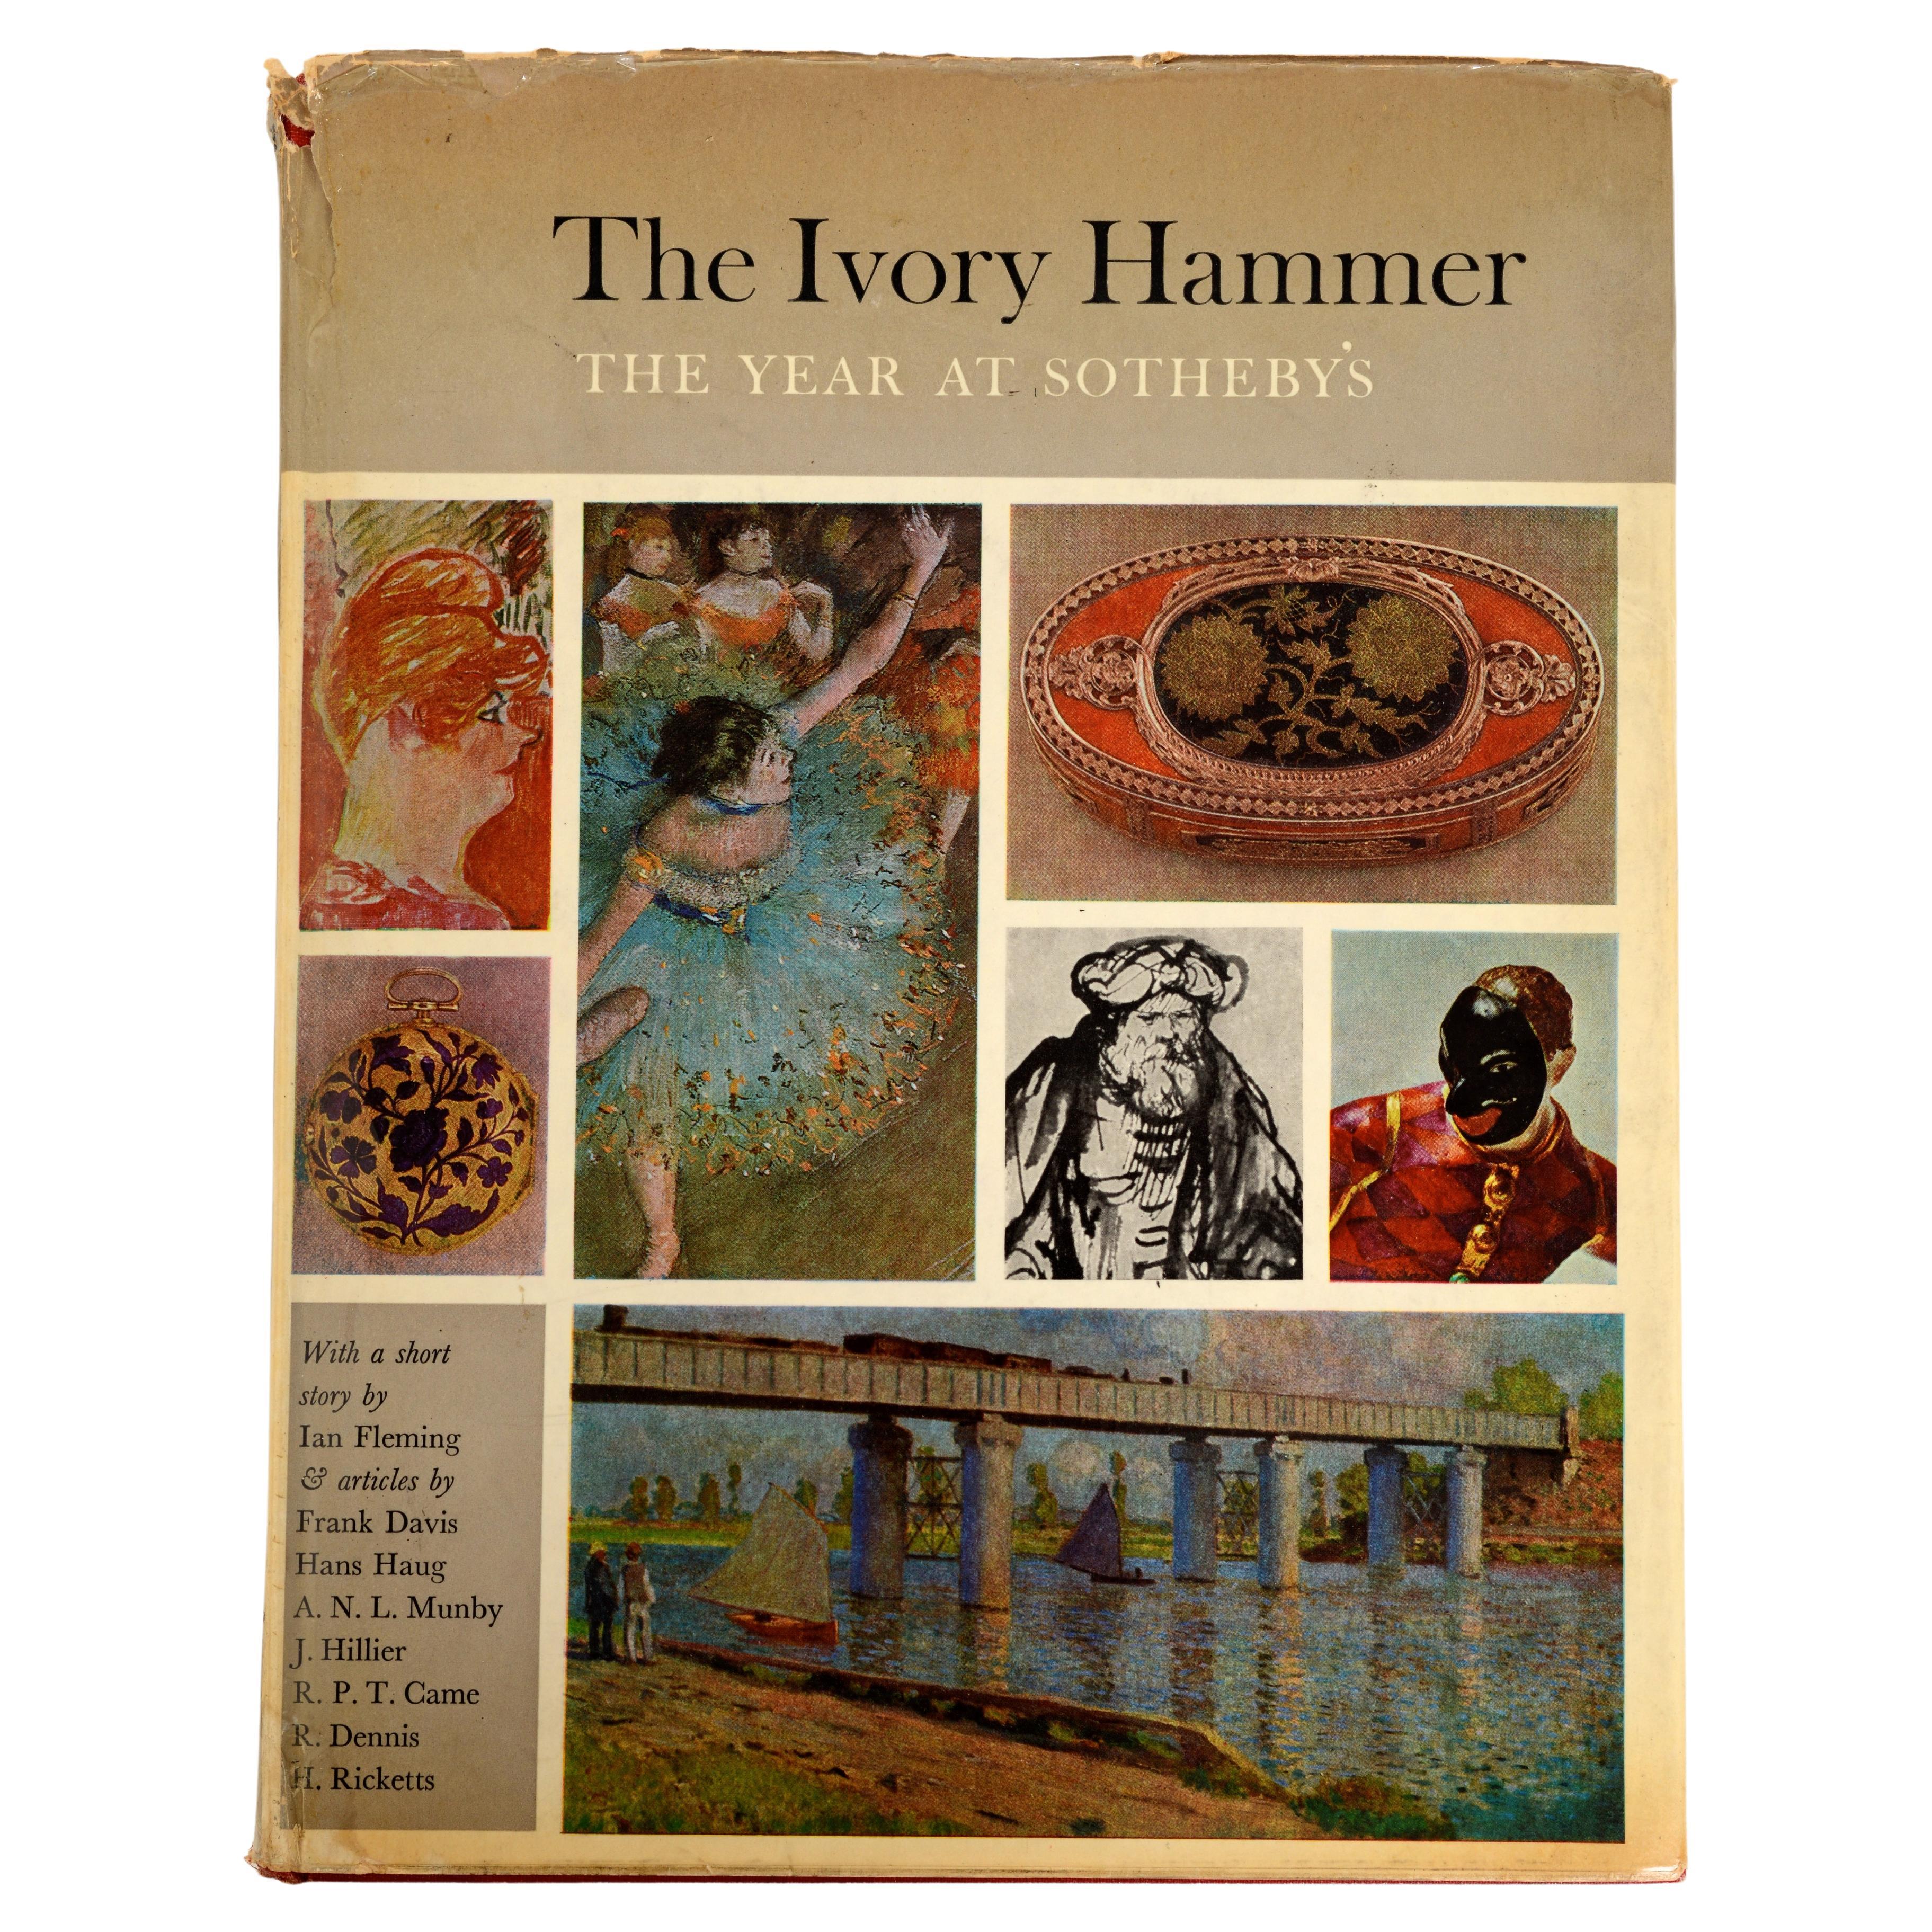 The Ivory Hammer, The Year At Sotheby's, 1962-1963, Ian Fleming James Bond Story For Sale